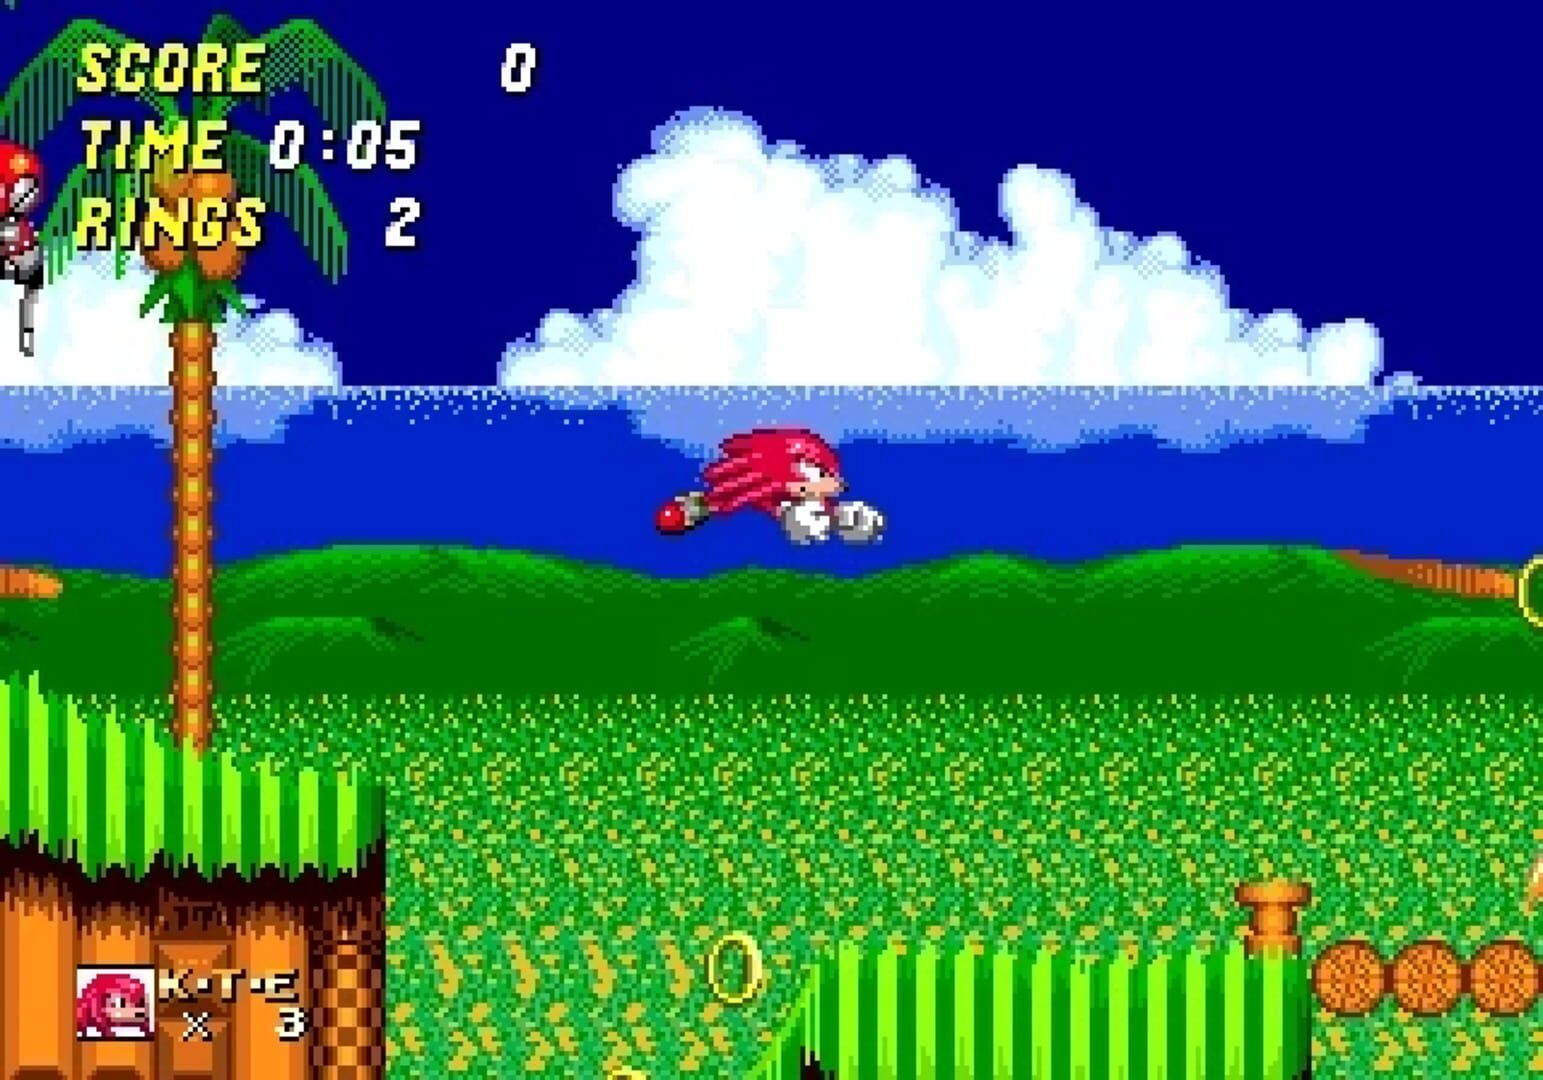 Knuckles the Echidna in Sonic the Hedgehog 2 Image